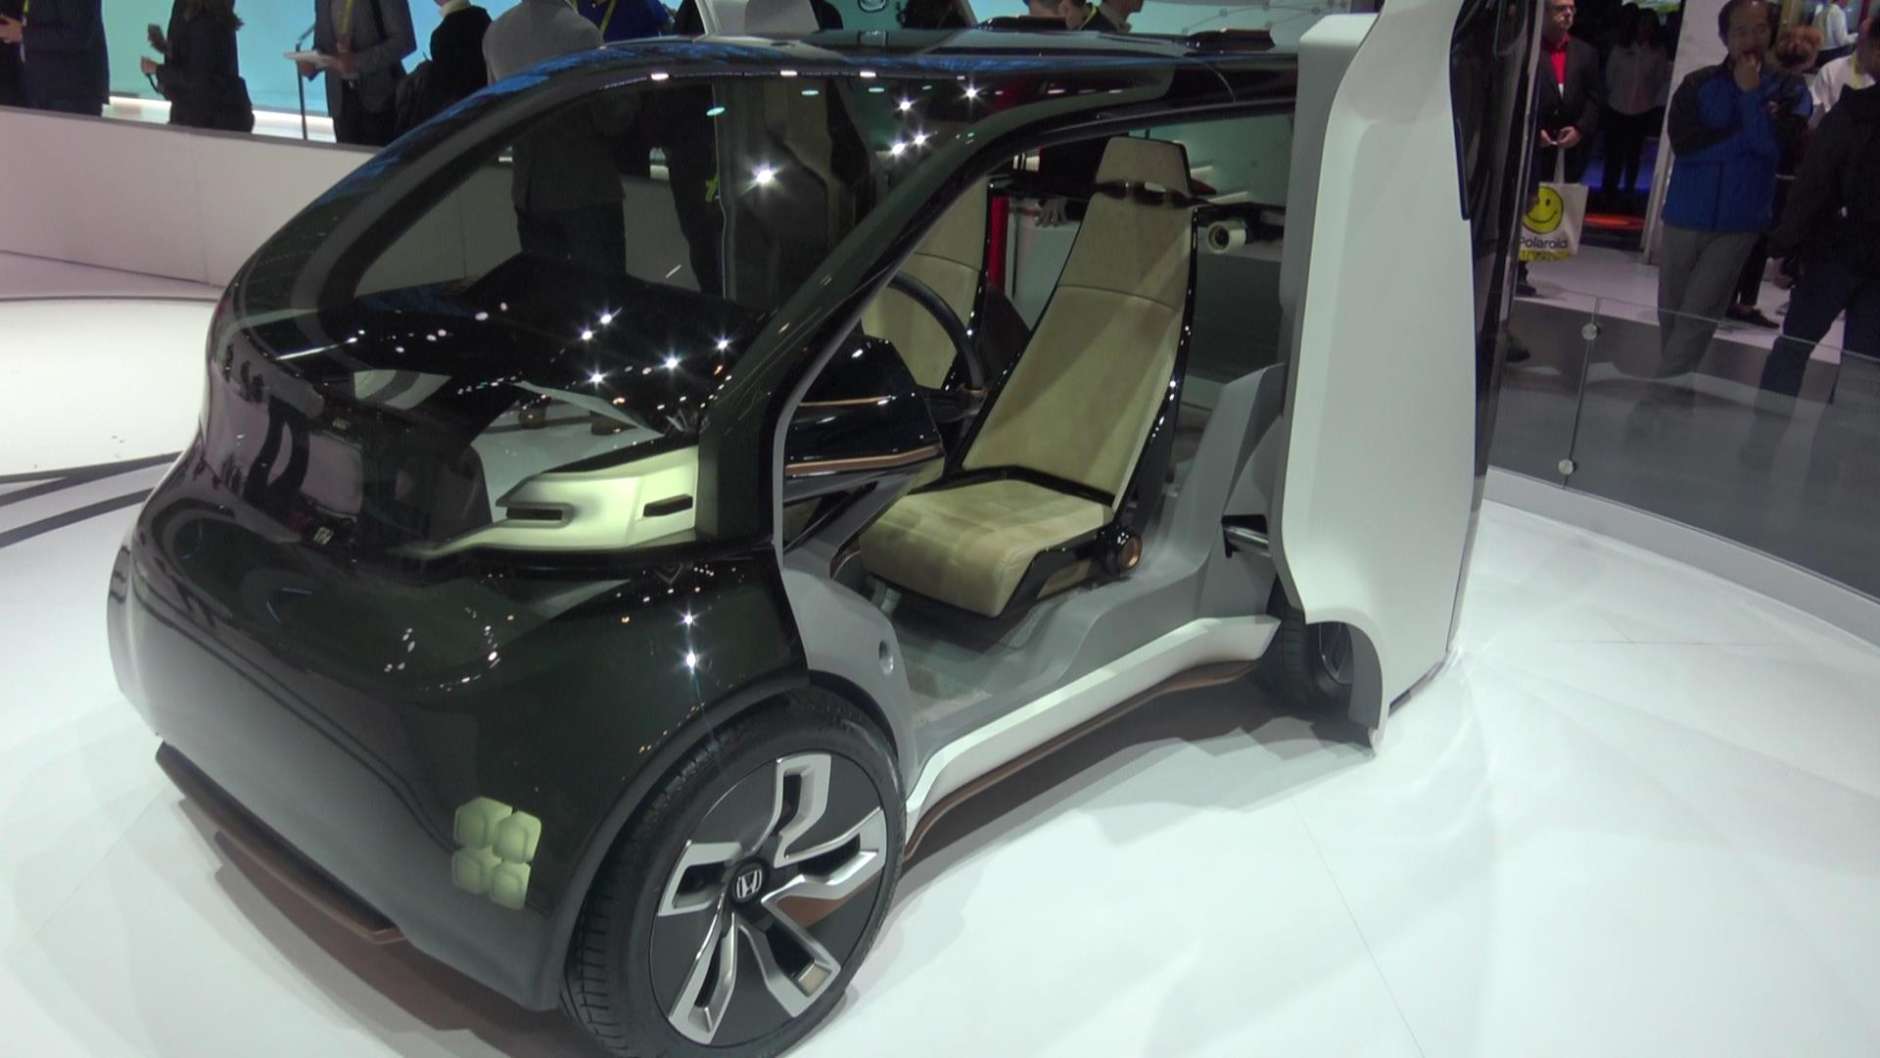 Honda has incorporated both concepts into NeuV, a self-driving, two-seat commuter car for urban environments powered by an Emotion Engine that learns by detecting the emotions behind the driver's judgments and then, based on the driver's past decisions, makes new choices and recommendations. (WTOP/Kenny Fried)